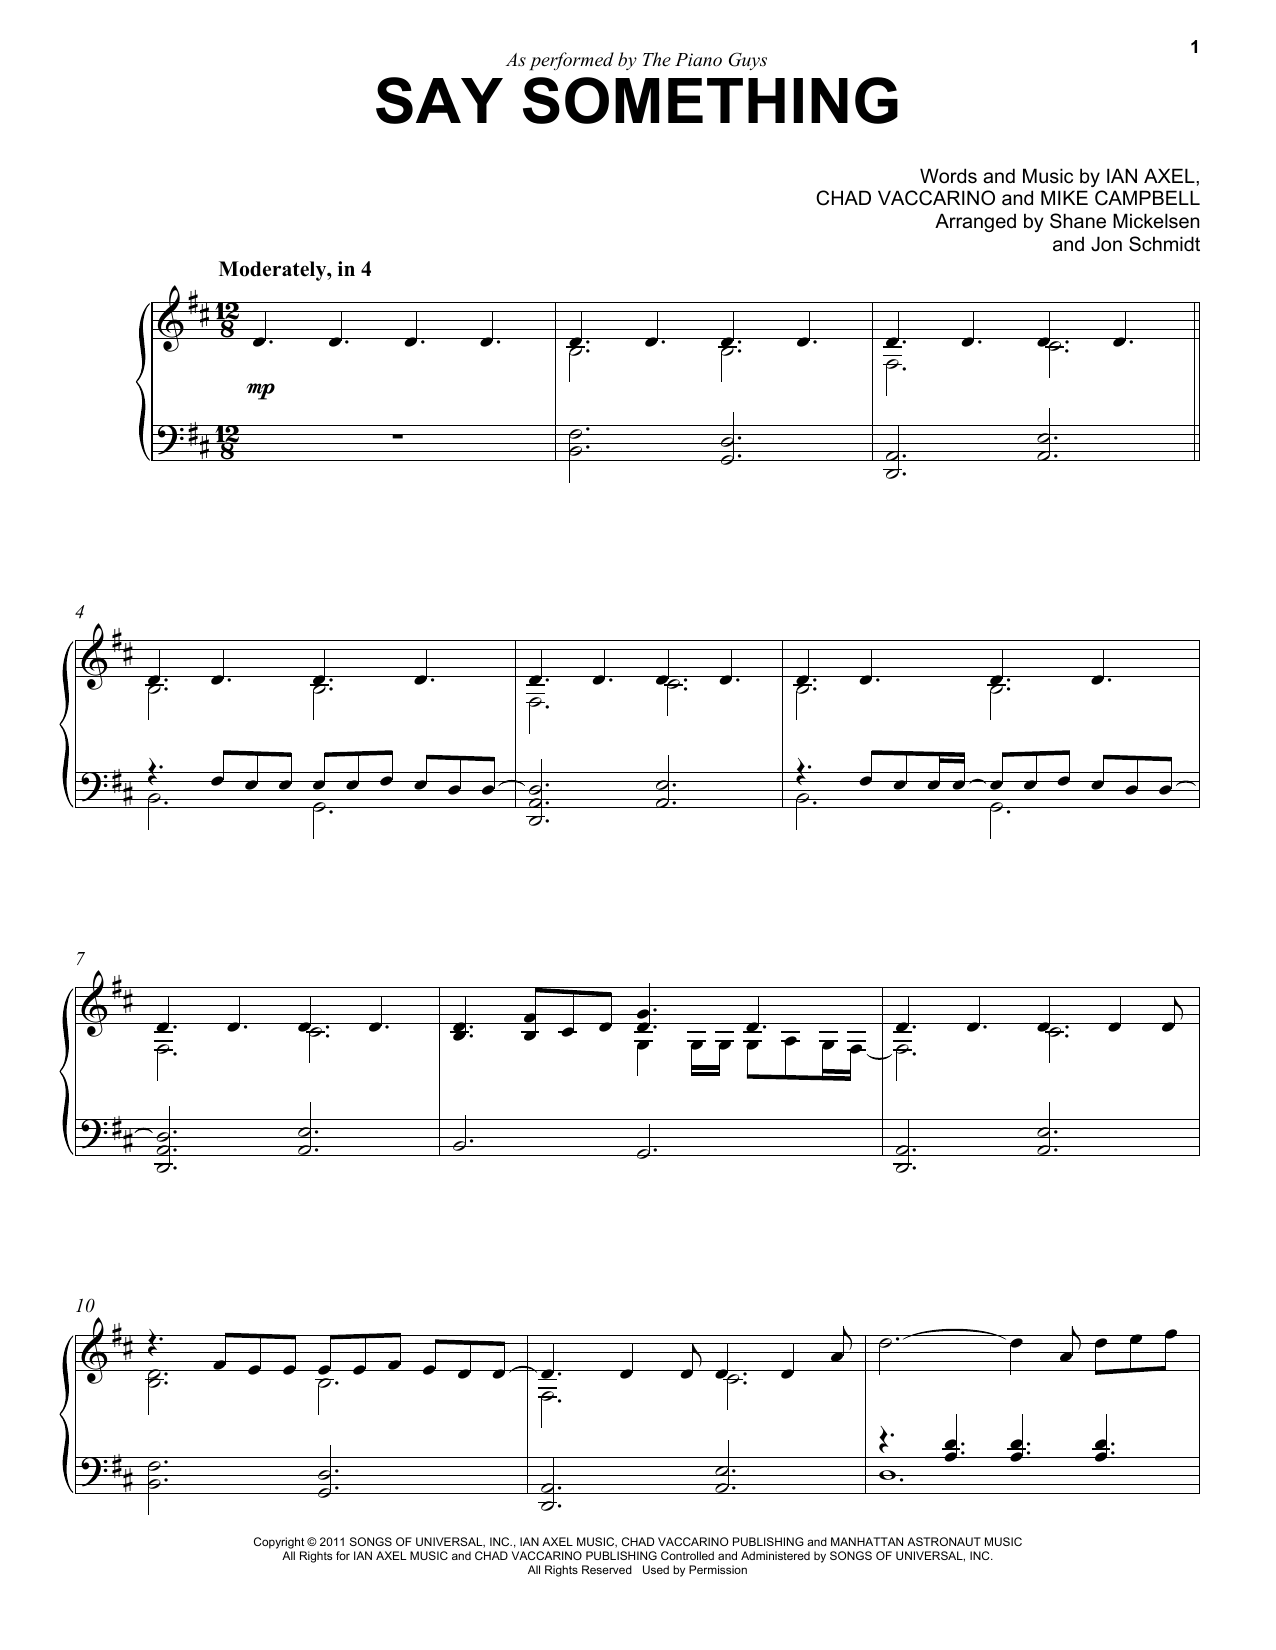 Download The Piano Guys Say Something Sheet Music